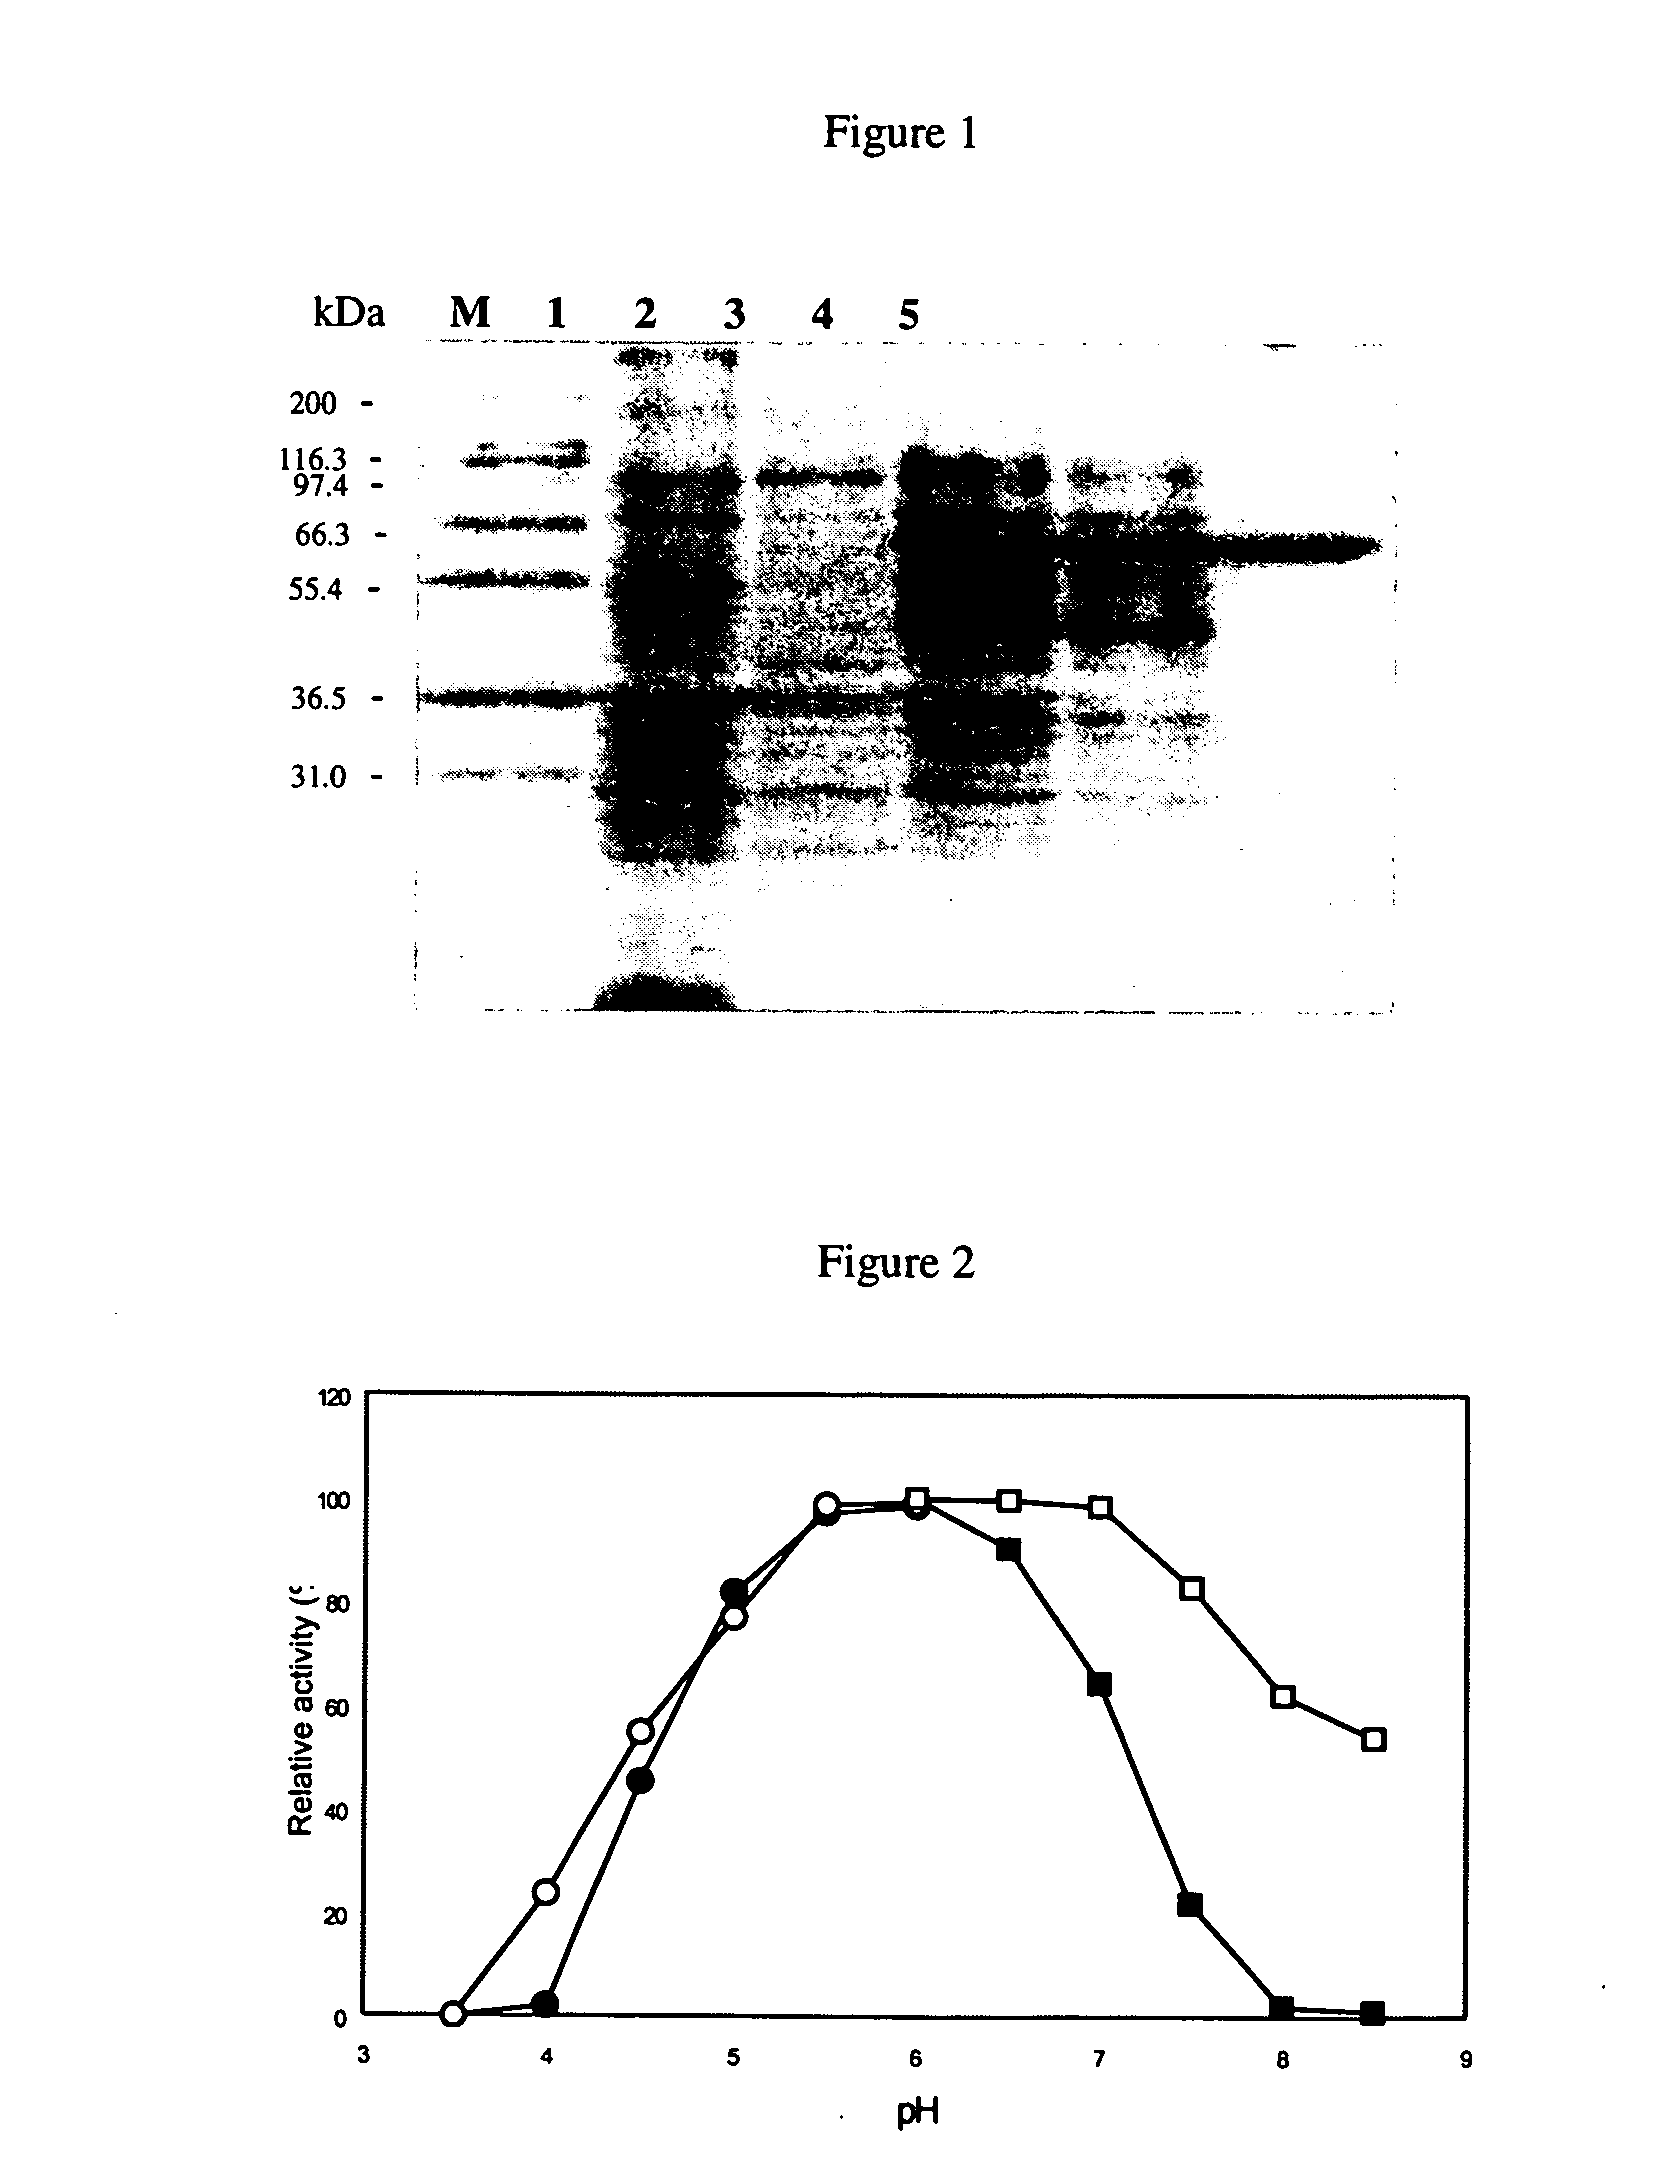 Novel trehalose synthase from Picrophilus torridus and methods of use thereof